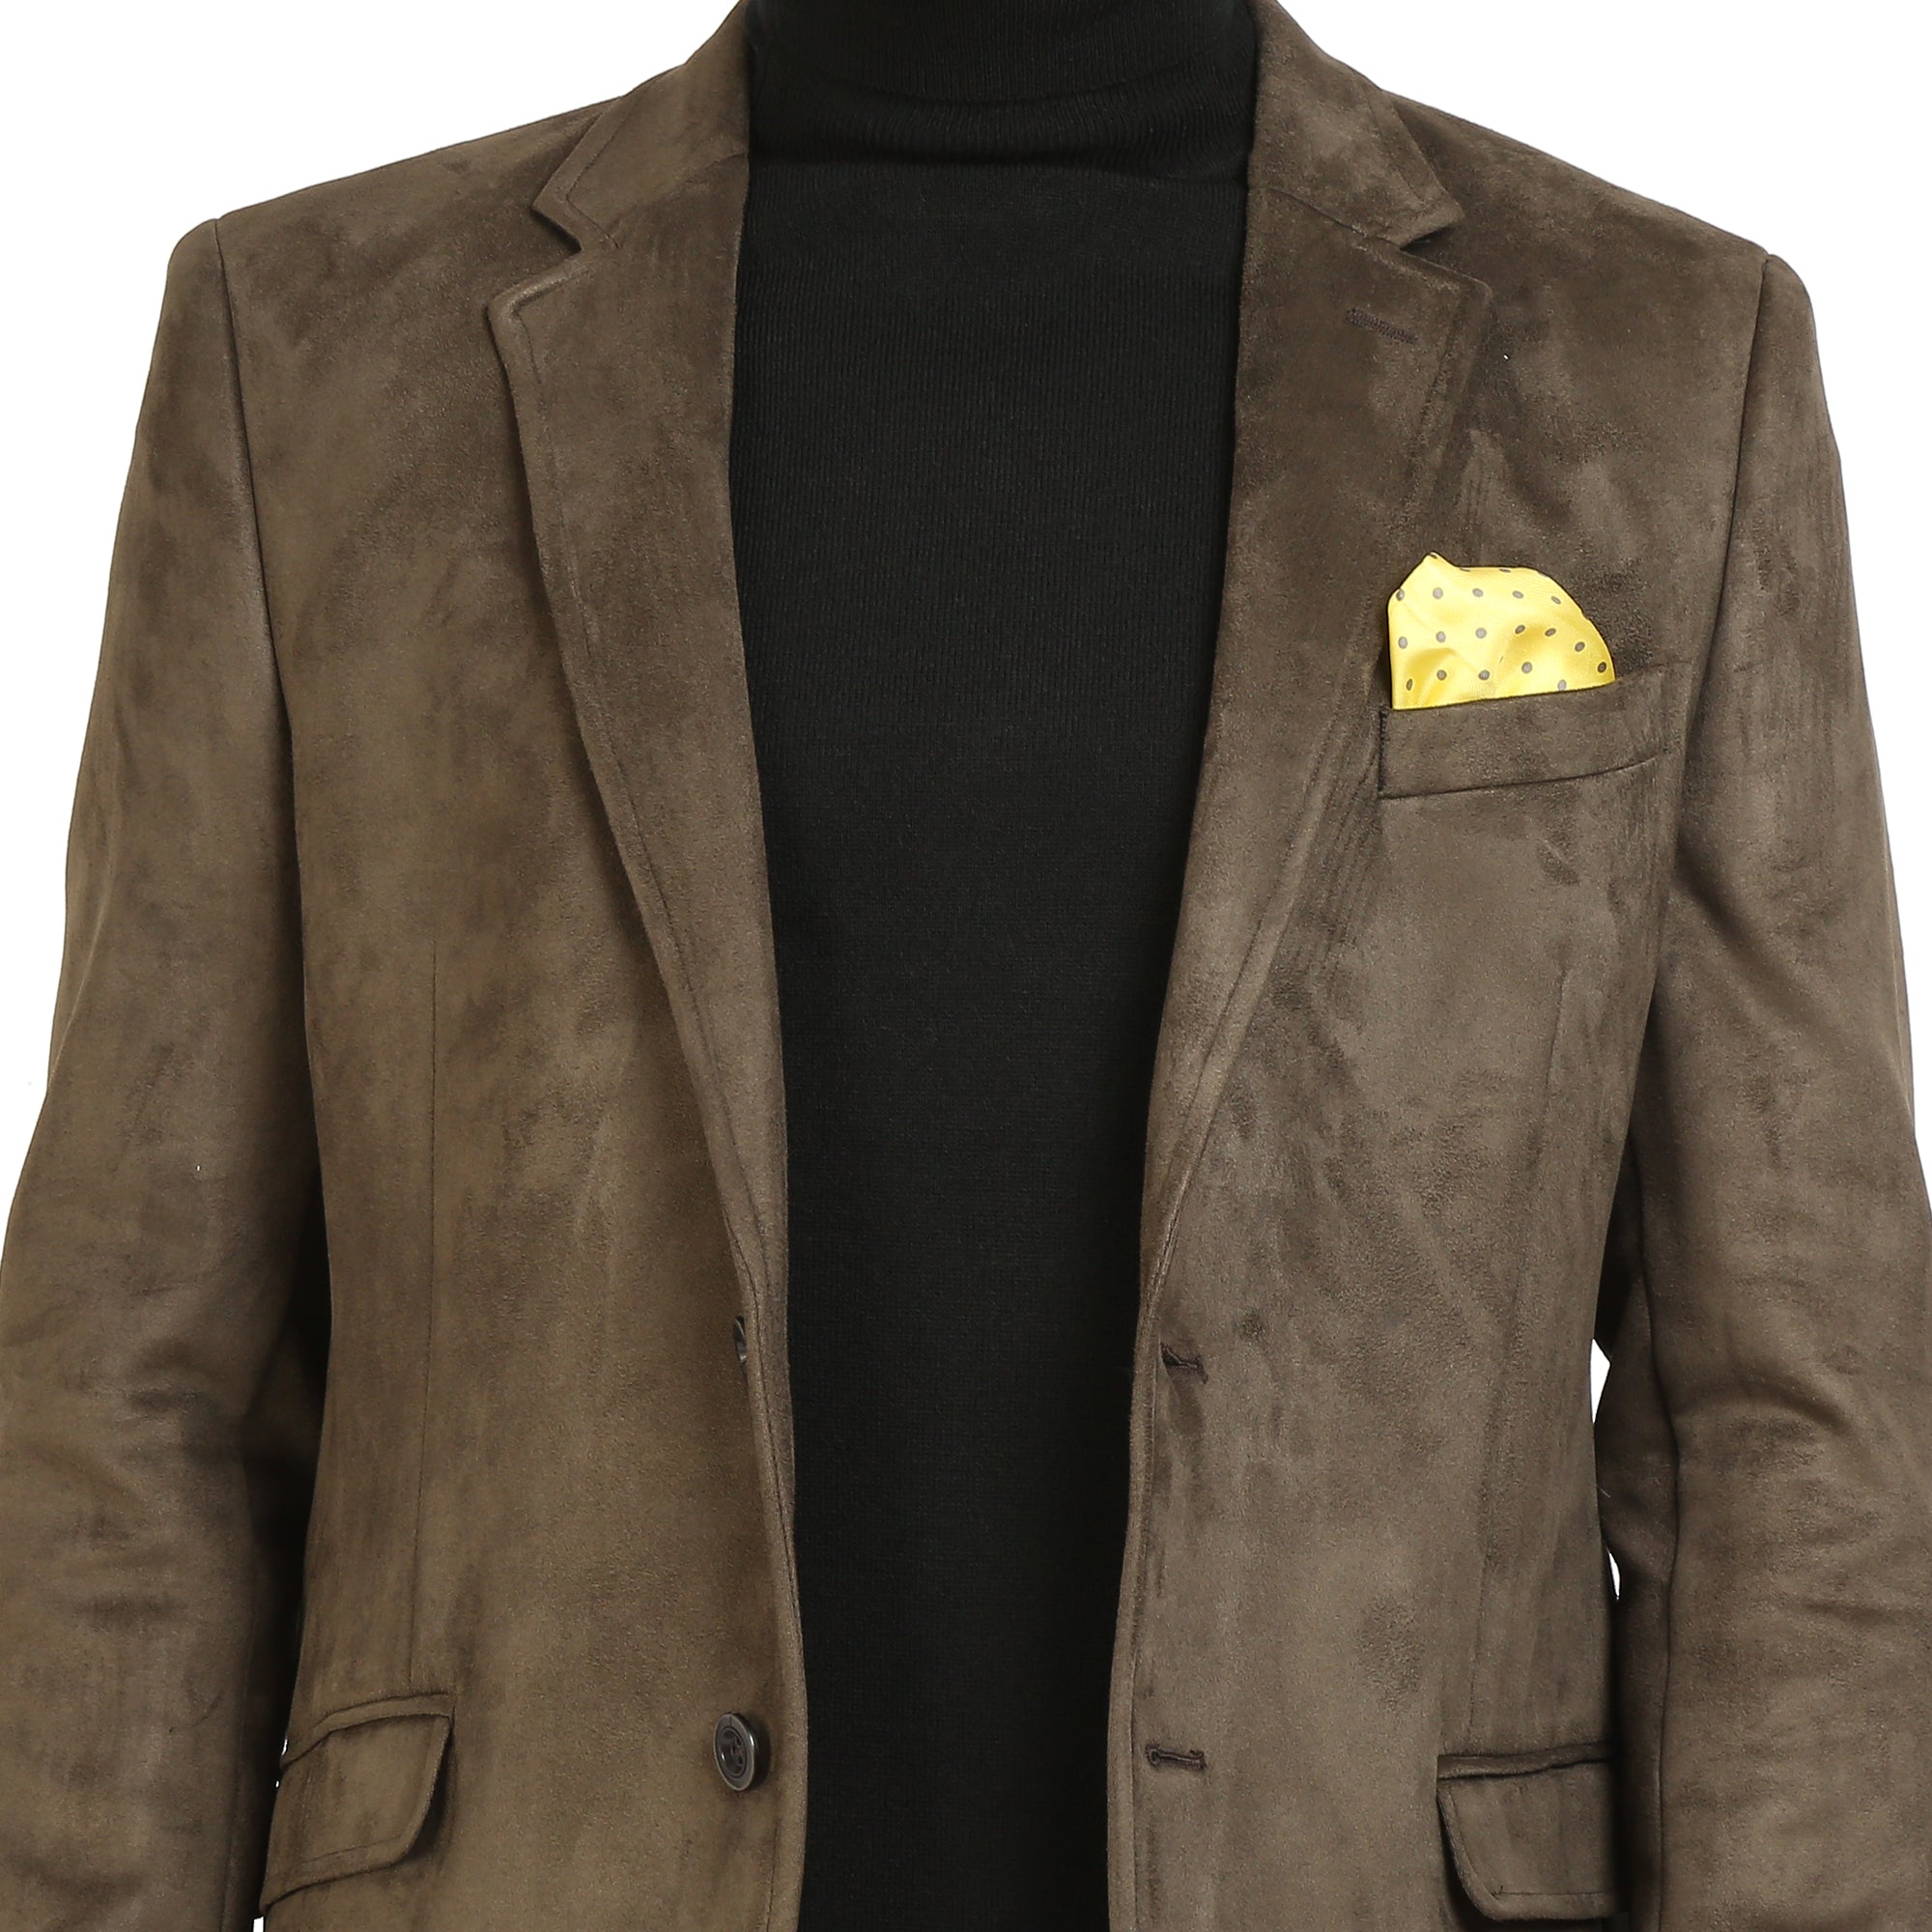 Suede Leather Blazer : Made To Measure Custom Jeans For Men & Women,  MakeYourOwnJeans®